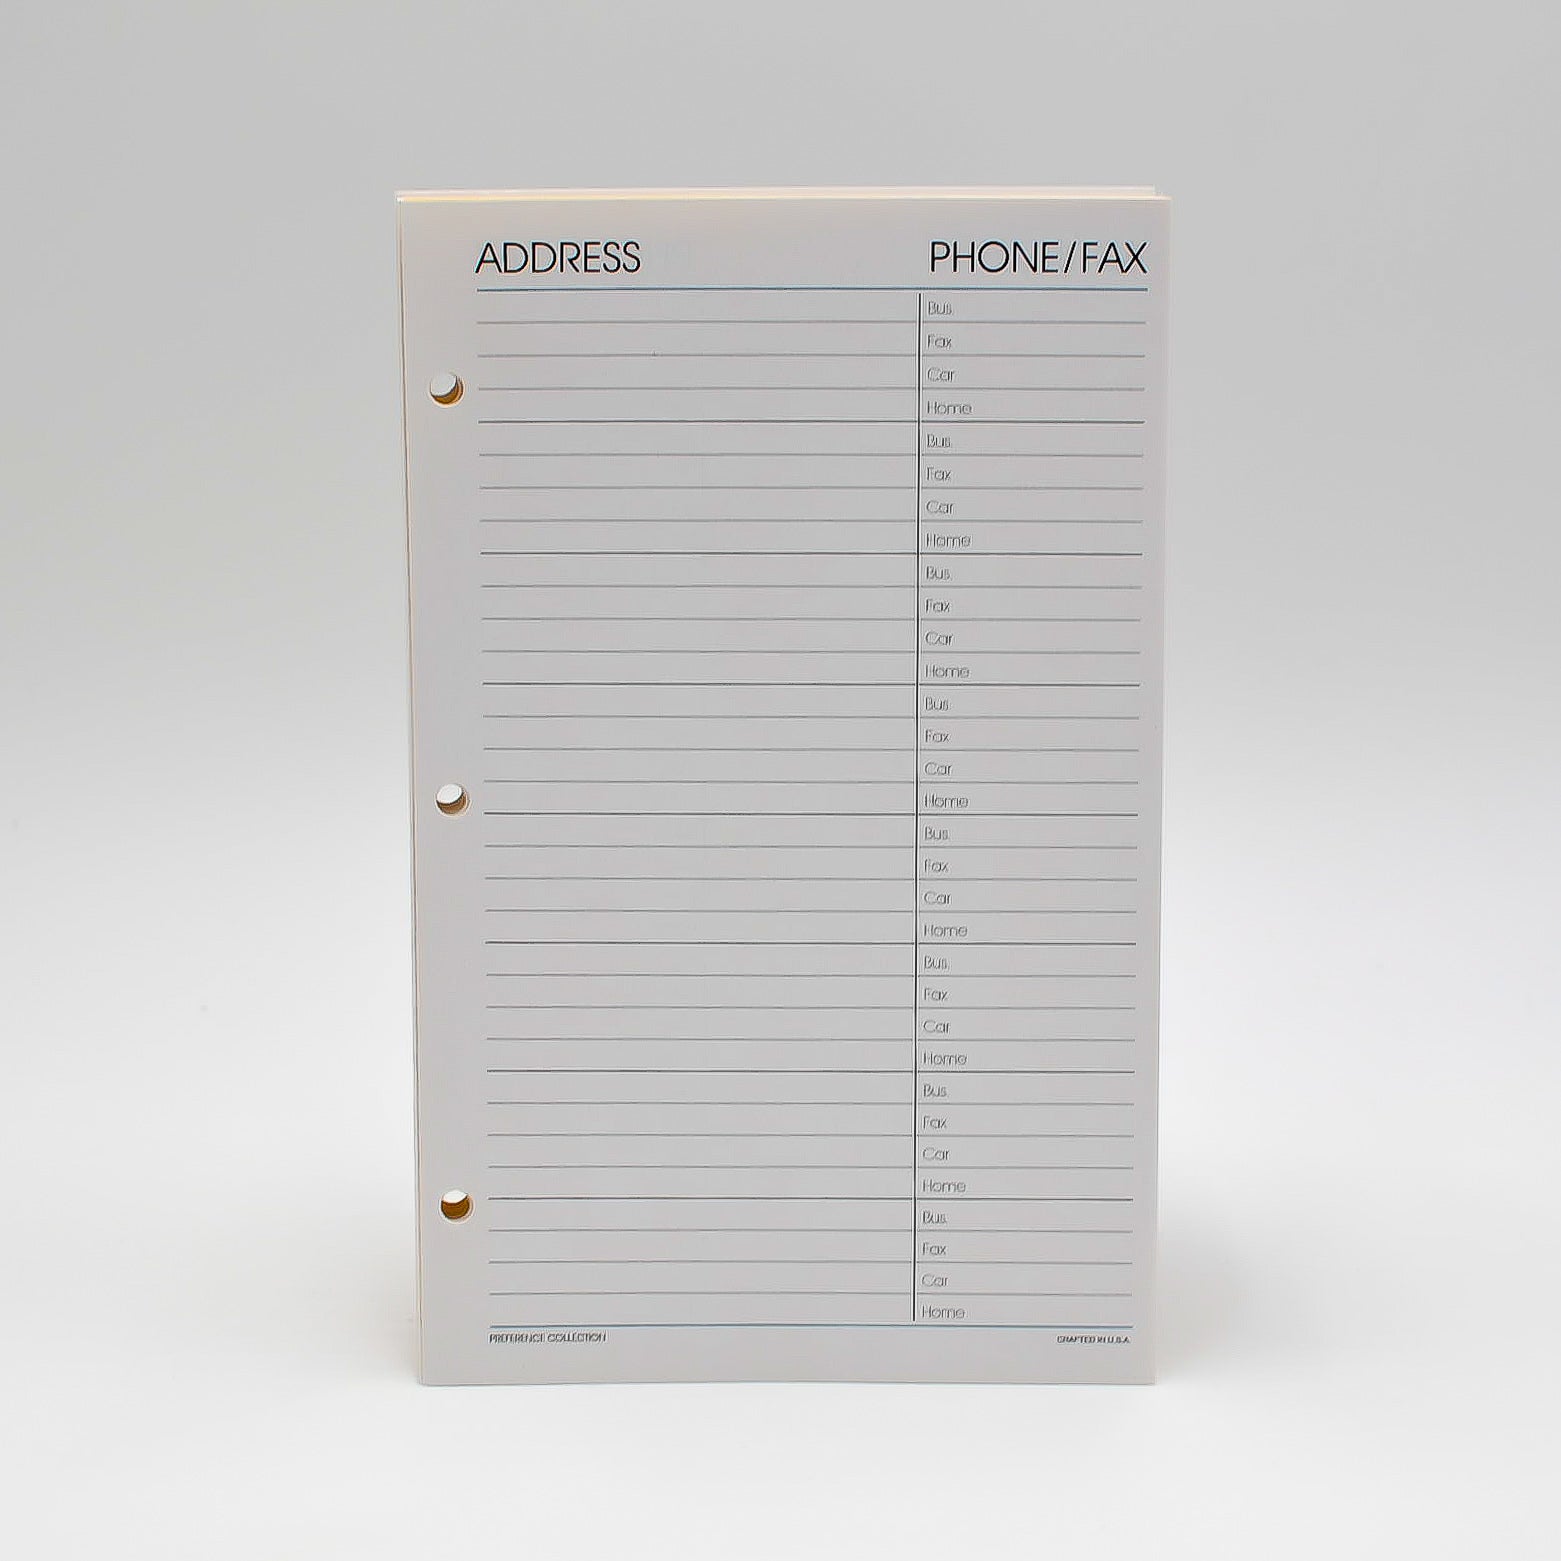 Address / Telephone 5 X 8 3-ring or 16-ring Sheets: PC85AD3